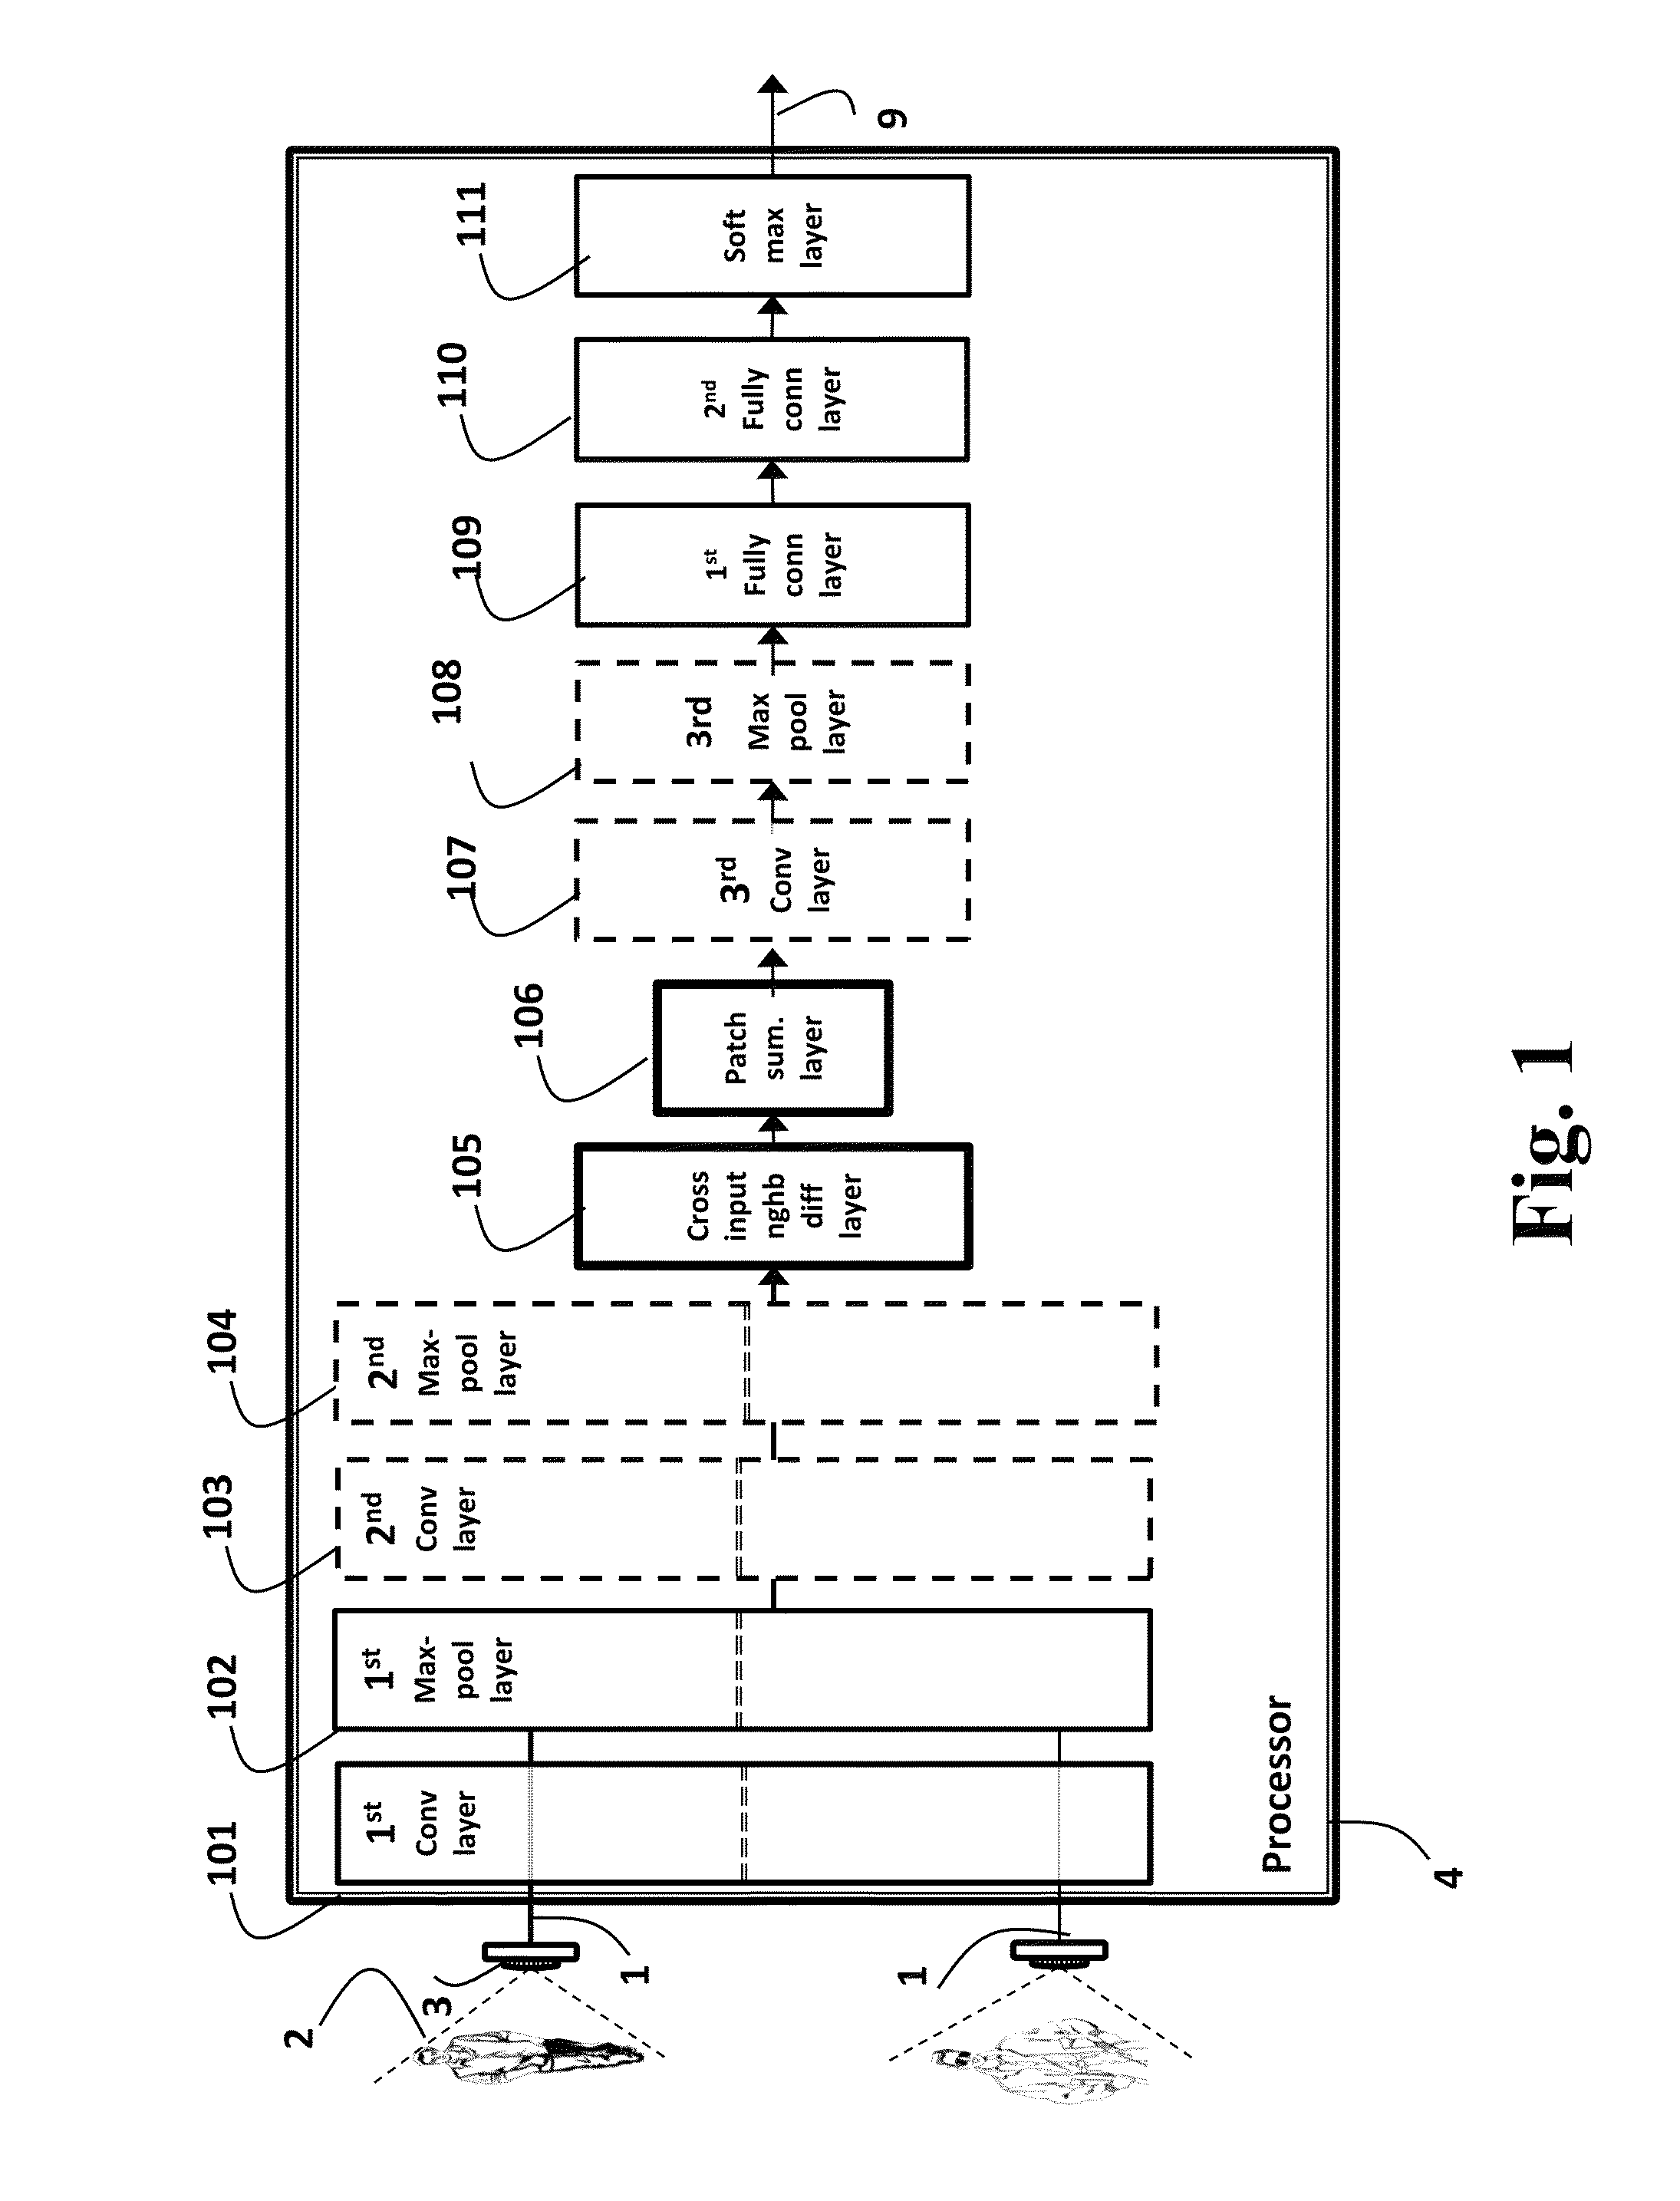 Method for determining similarity of objects represented in images